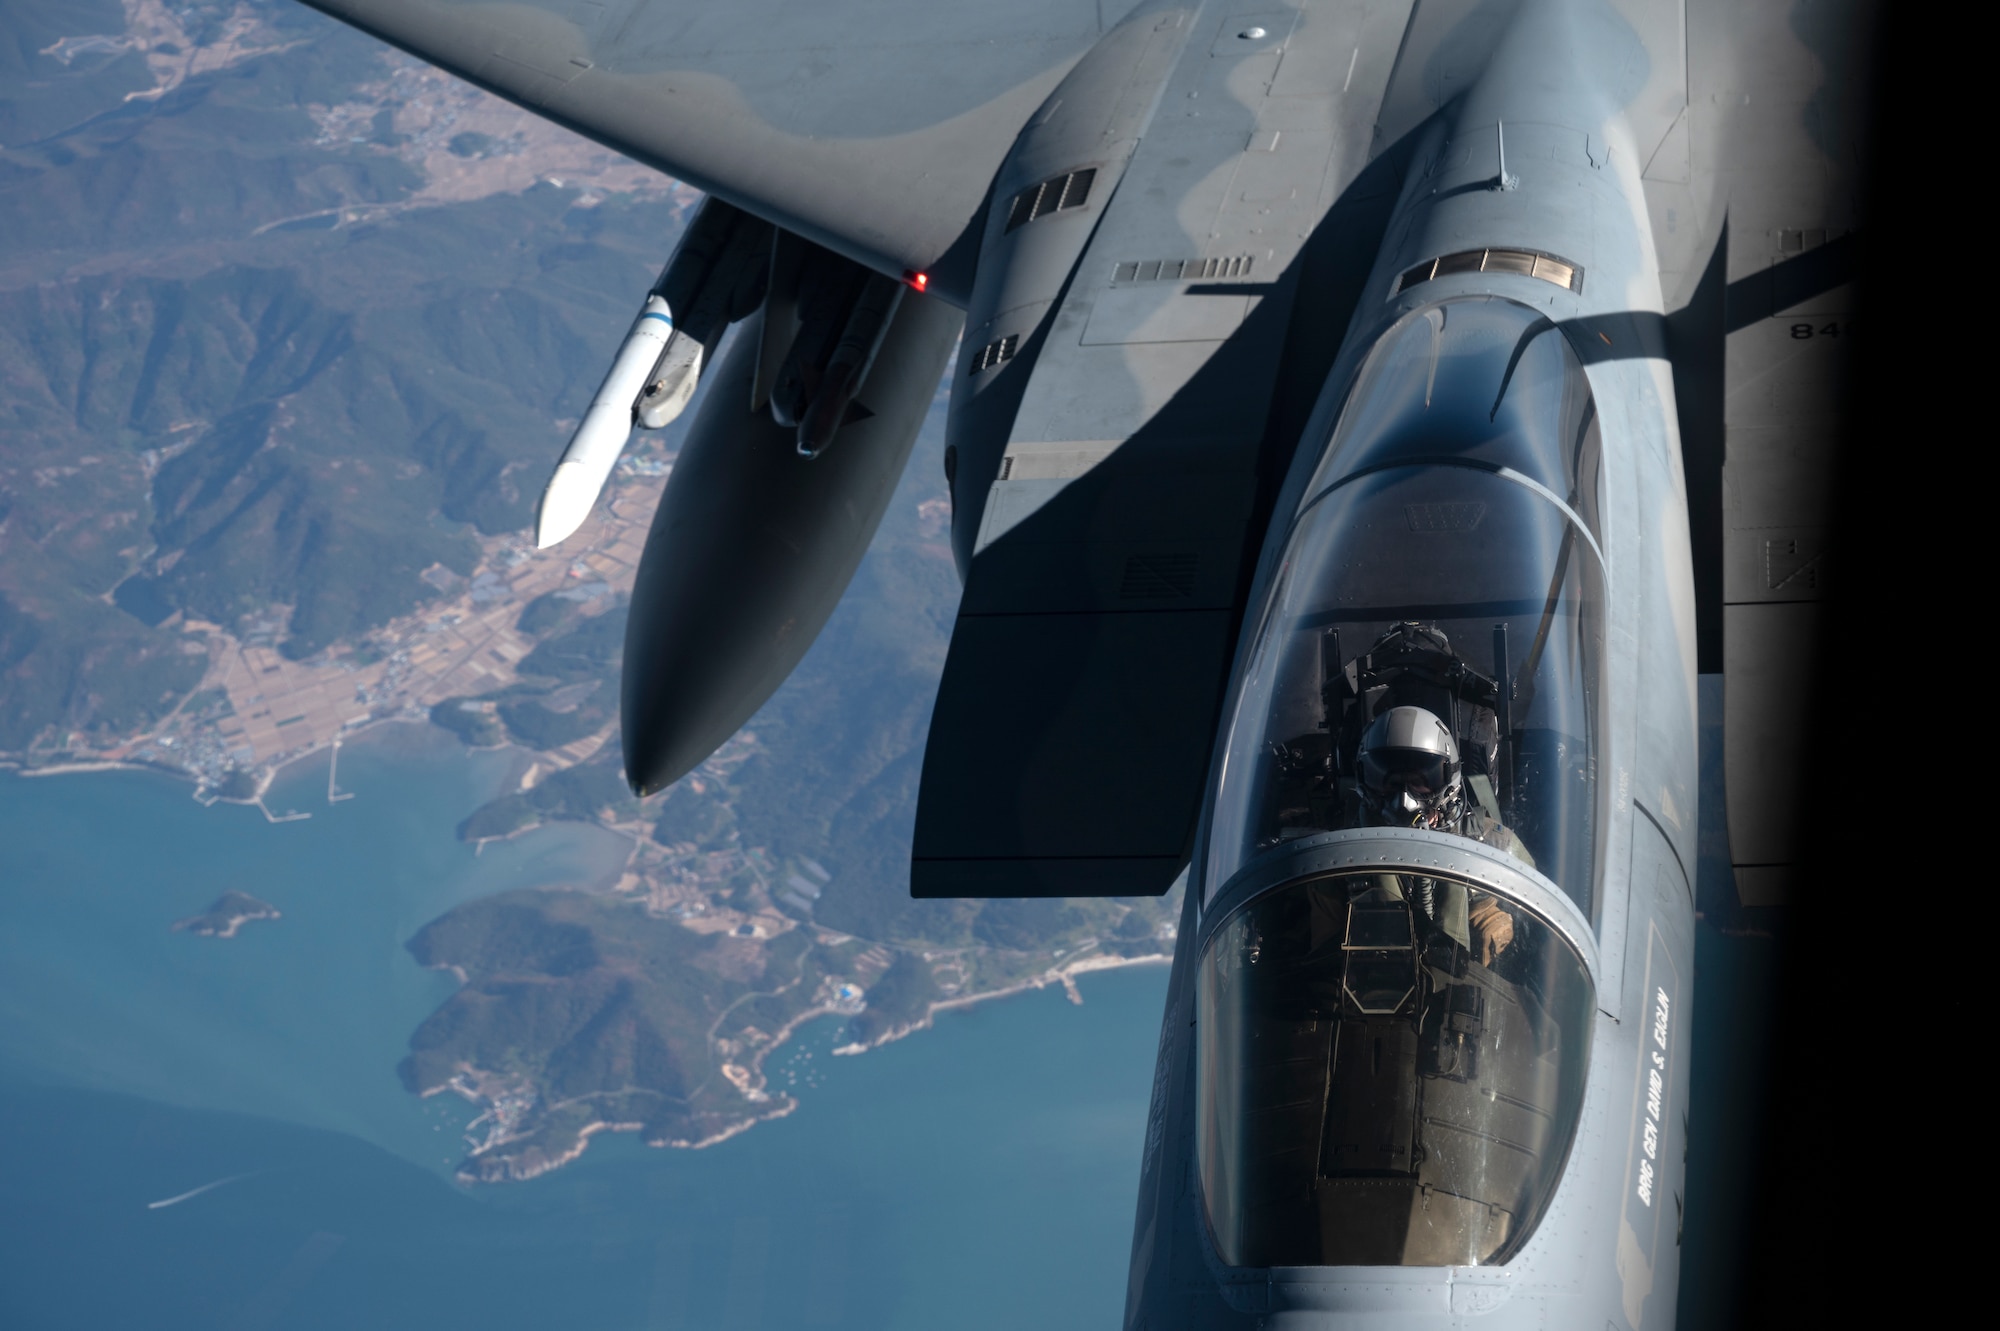 A U.S. Air Force 44th Fighter Squadron F-15C Eagle receives fuel from a 909th Air Refueling Squadron KC-135 Stratotanker over South Korea, Nov. 4, 2022. The Eagle's air superiority was achieved through a mixture of unprecedented maneuverability and acceleration, range, weapons and avionics. (U.S. Air Force photo by Senior Airman Jessi Roth)